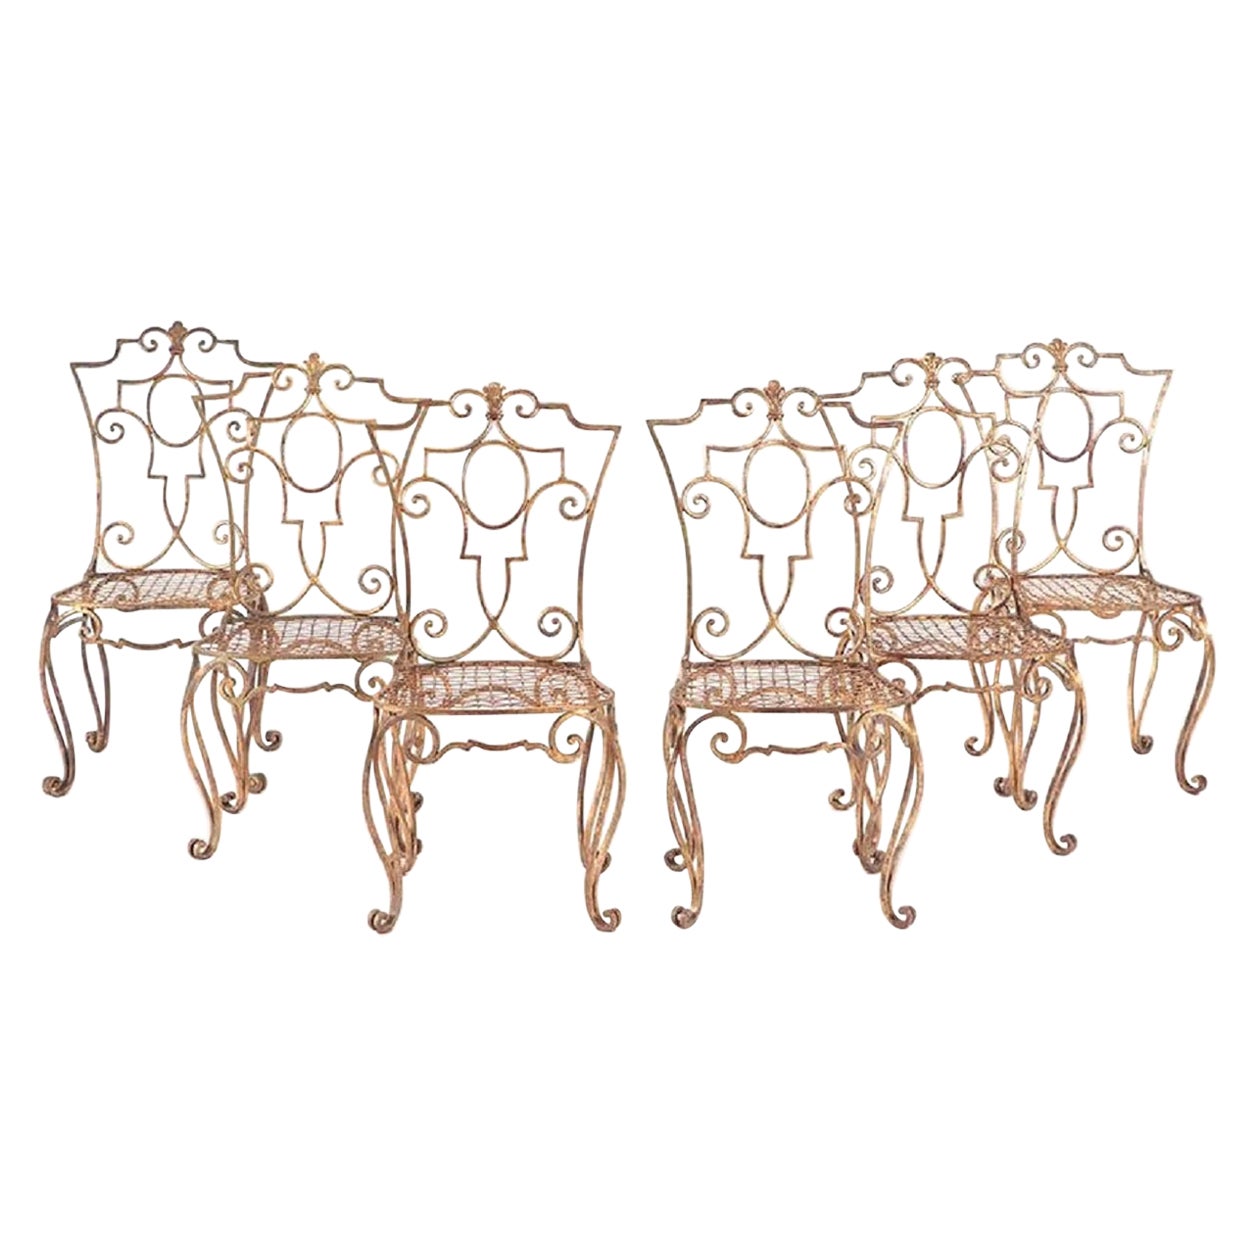 Jean-Charles Moreux Gilt Iron Chairs, Set of 6